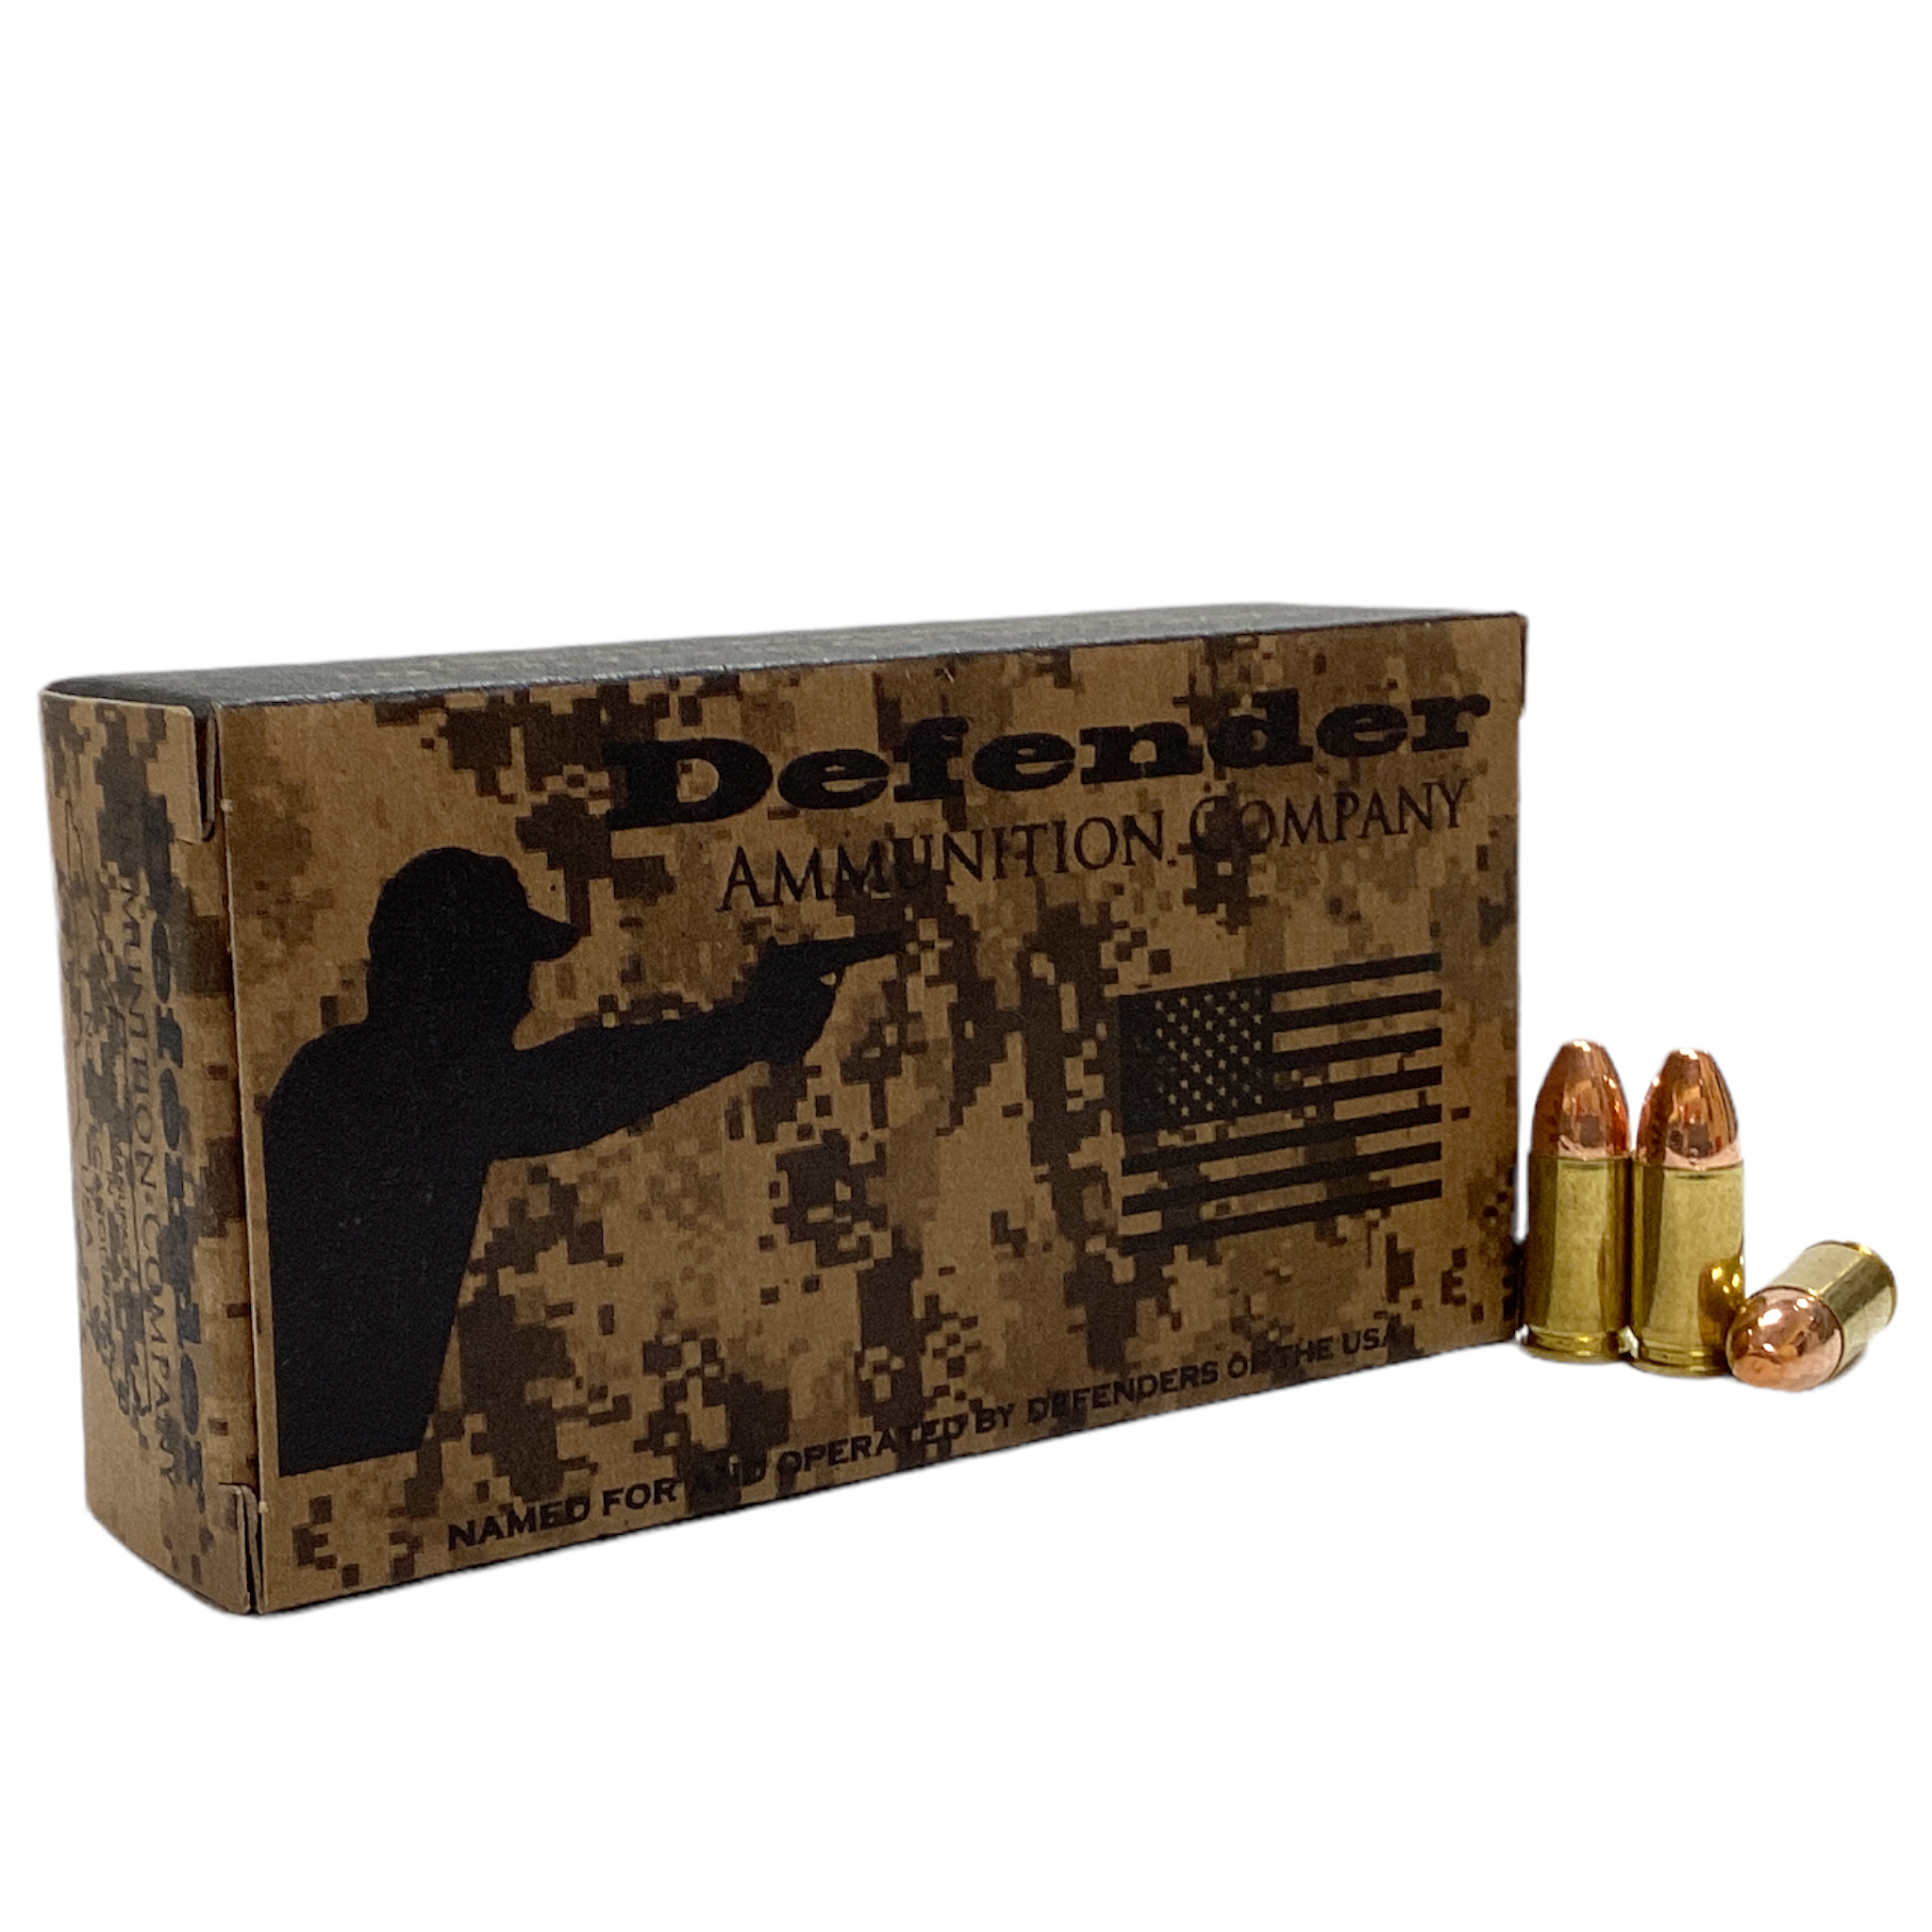 TargetPractice Pro Series Ships Immediately RN Ammo